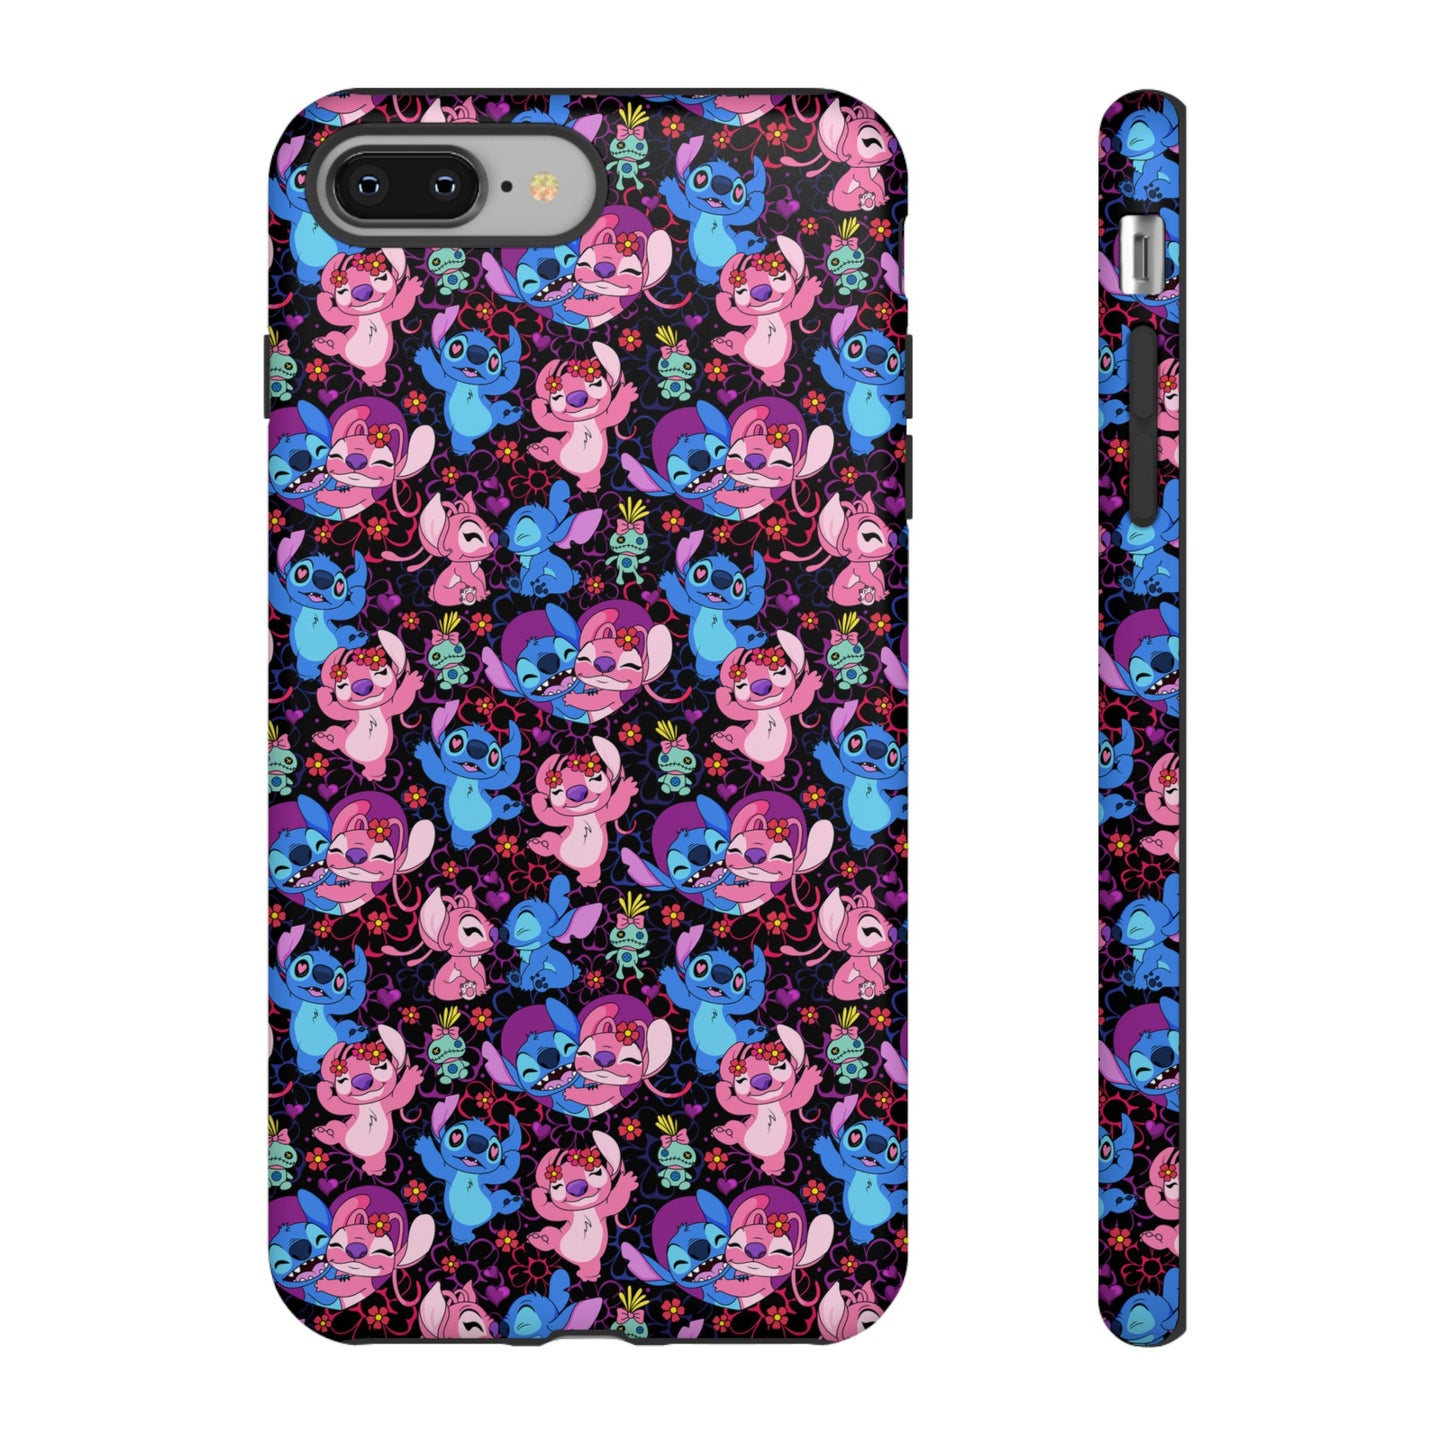 Besties Tough Cell Phone Cases